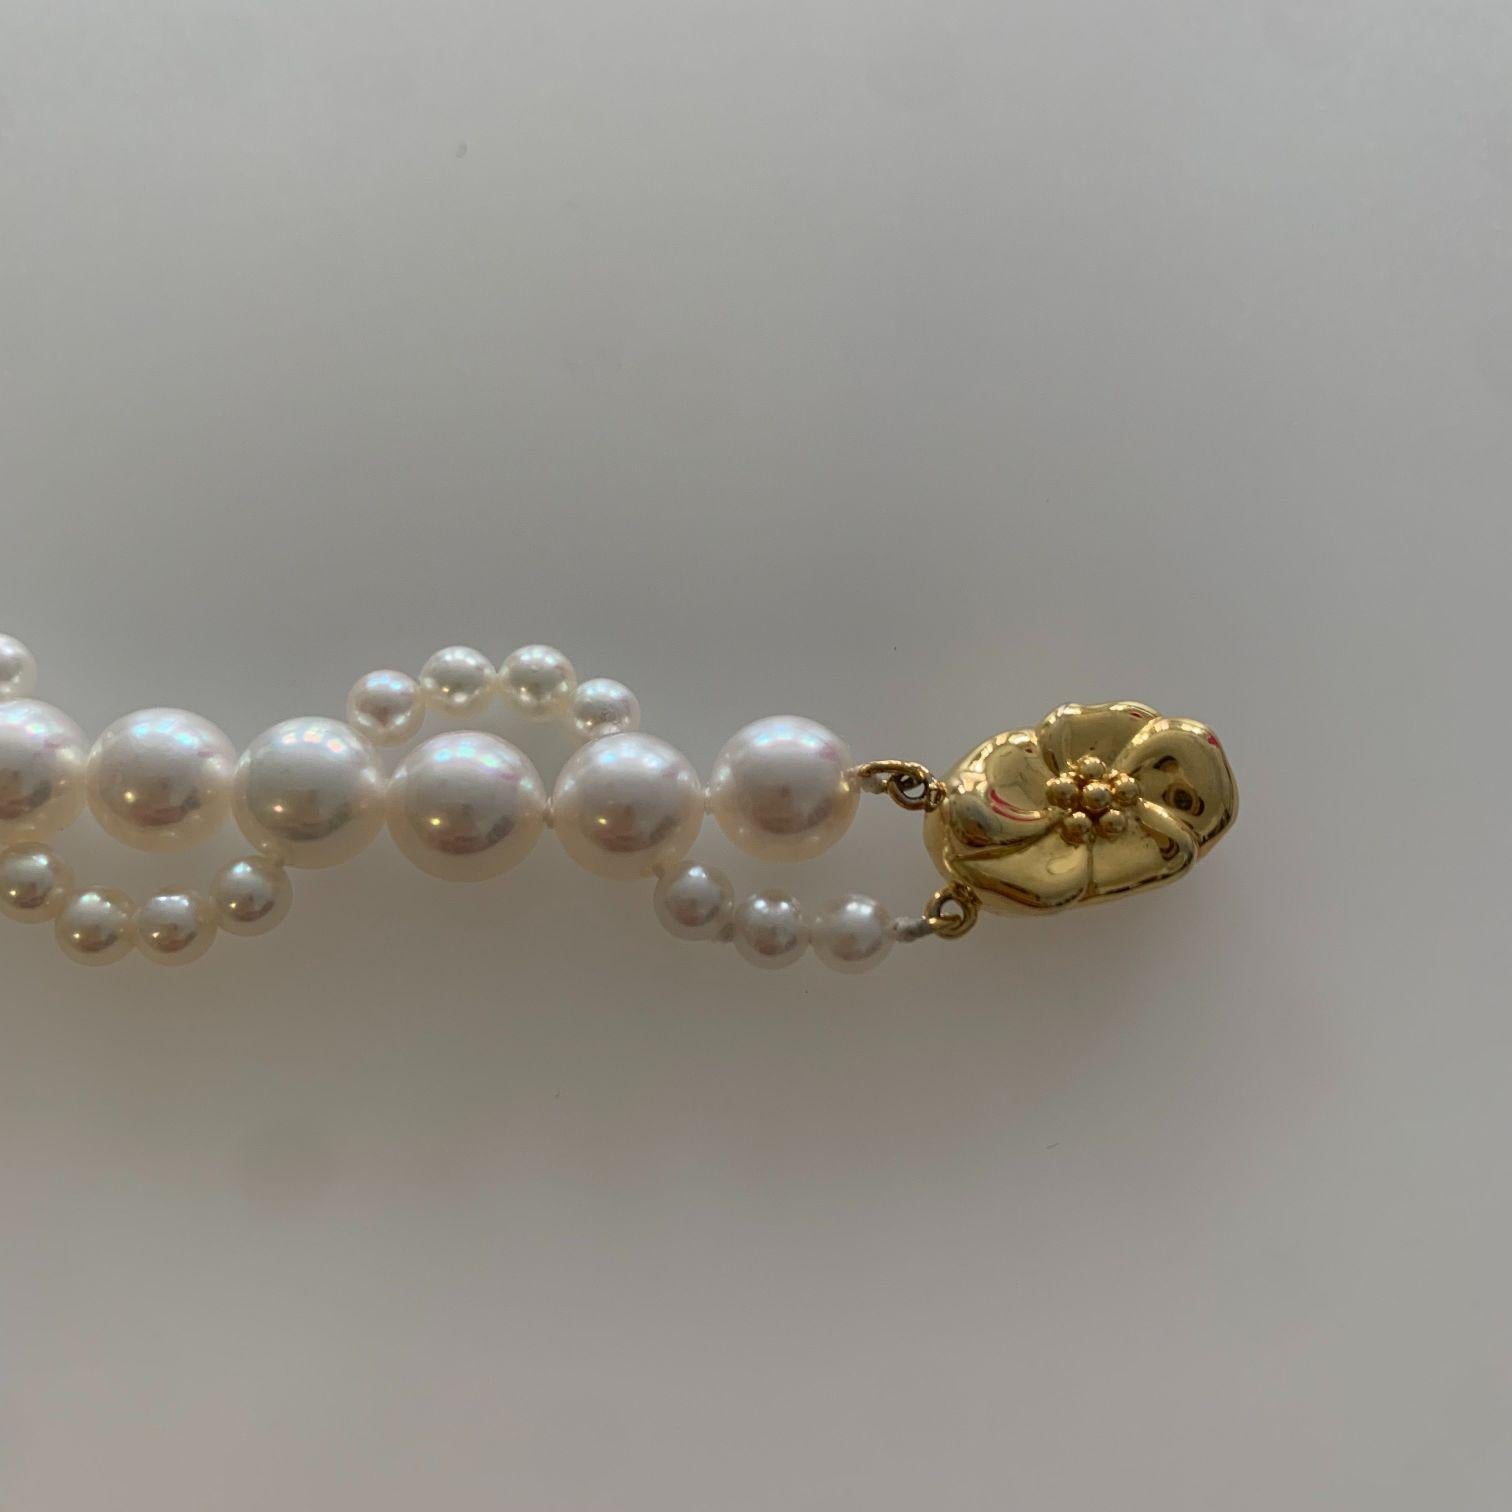 White Akoya Pearl Woven Strand Bracelet, 'BL50' In New Condition For Sale In City, SG